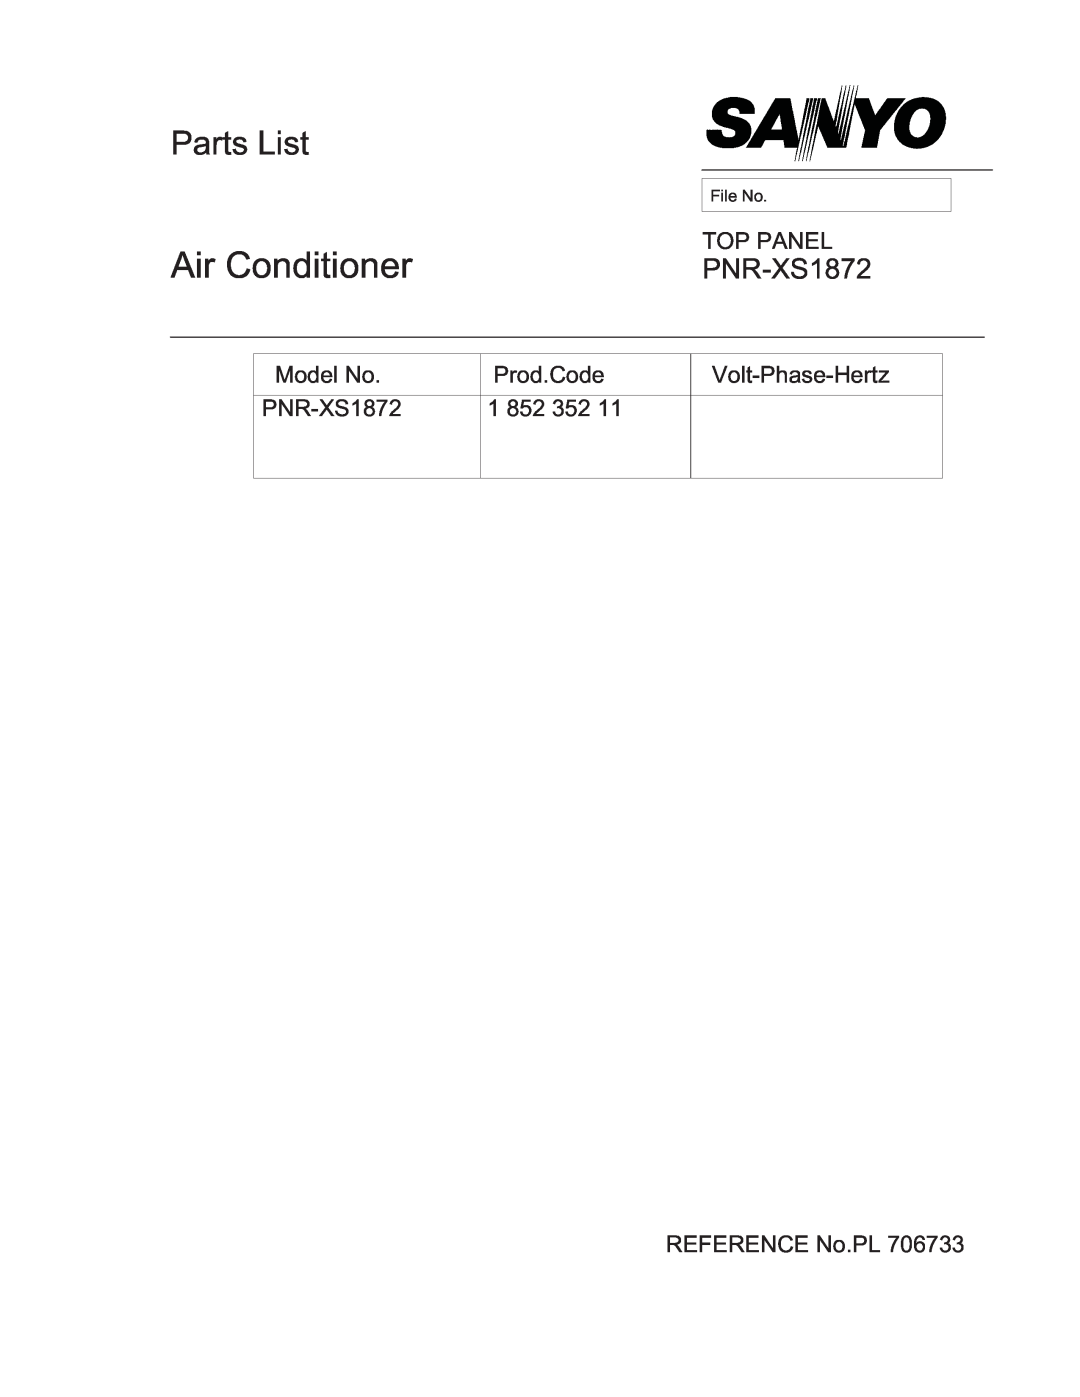 Sanyo PNR-XS1872 manual Air Conditioner, Parts List, Top Panel, Model No, Prod.Code, Volt-Phase-Hertz, REFERENCE No.PL 